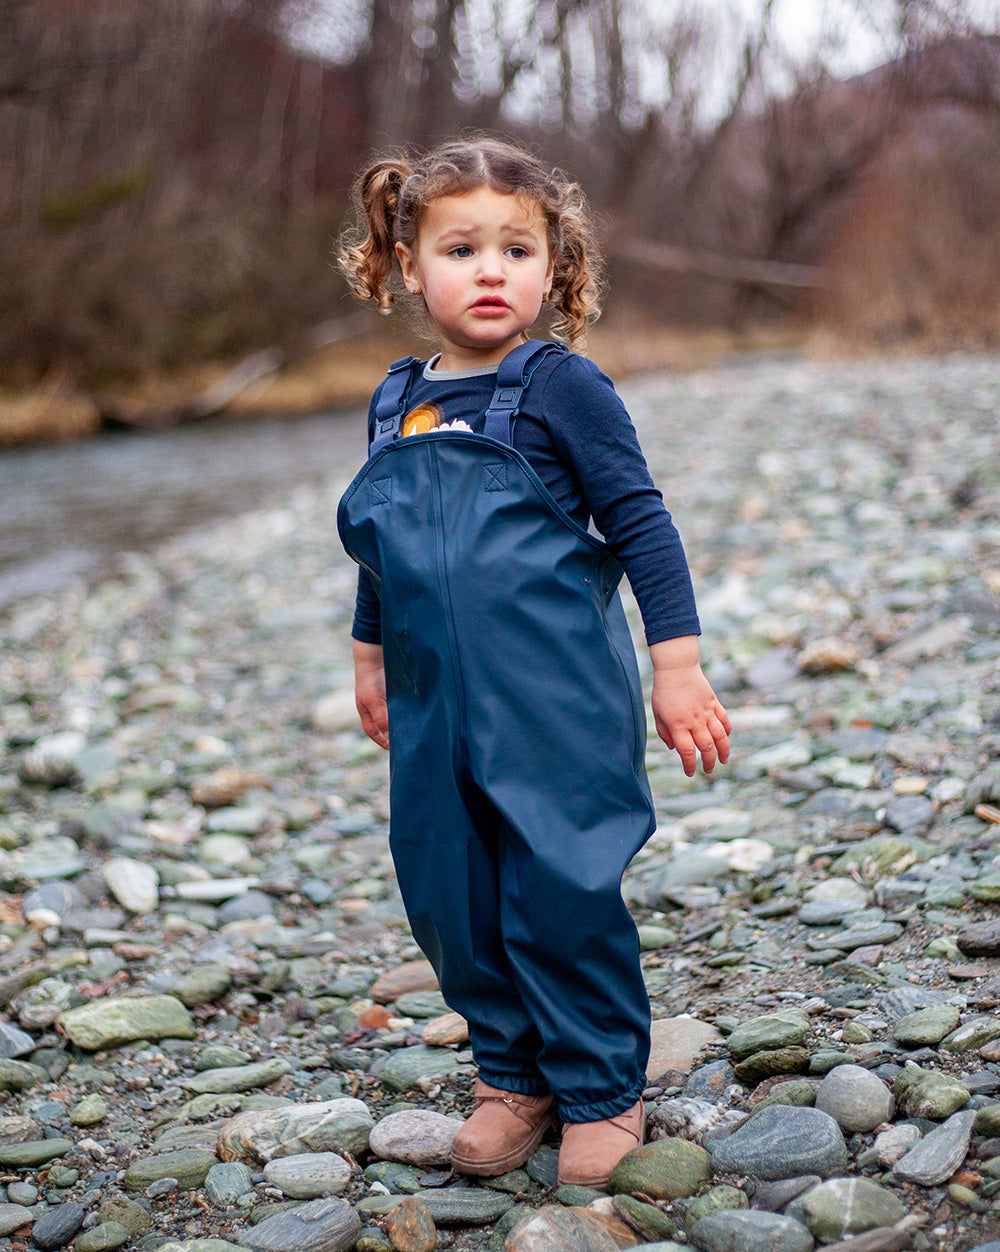 Puddle Suit in Navy